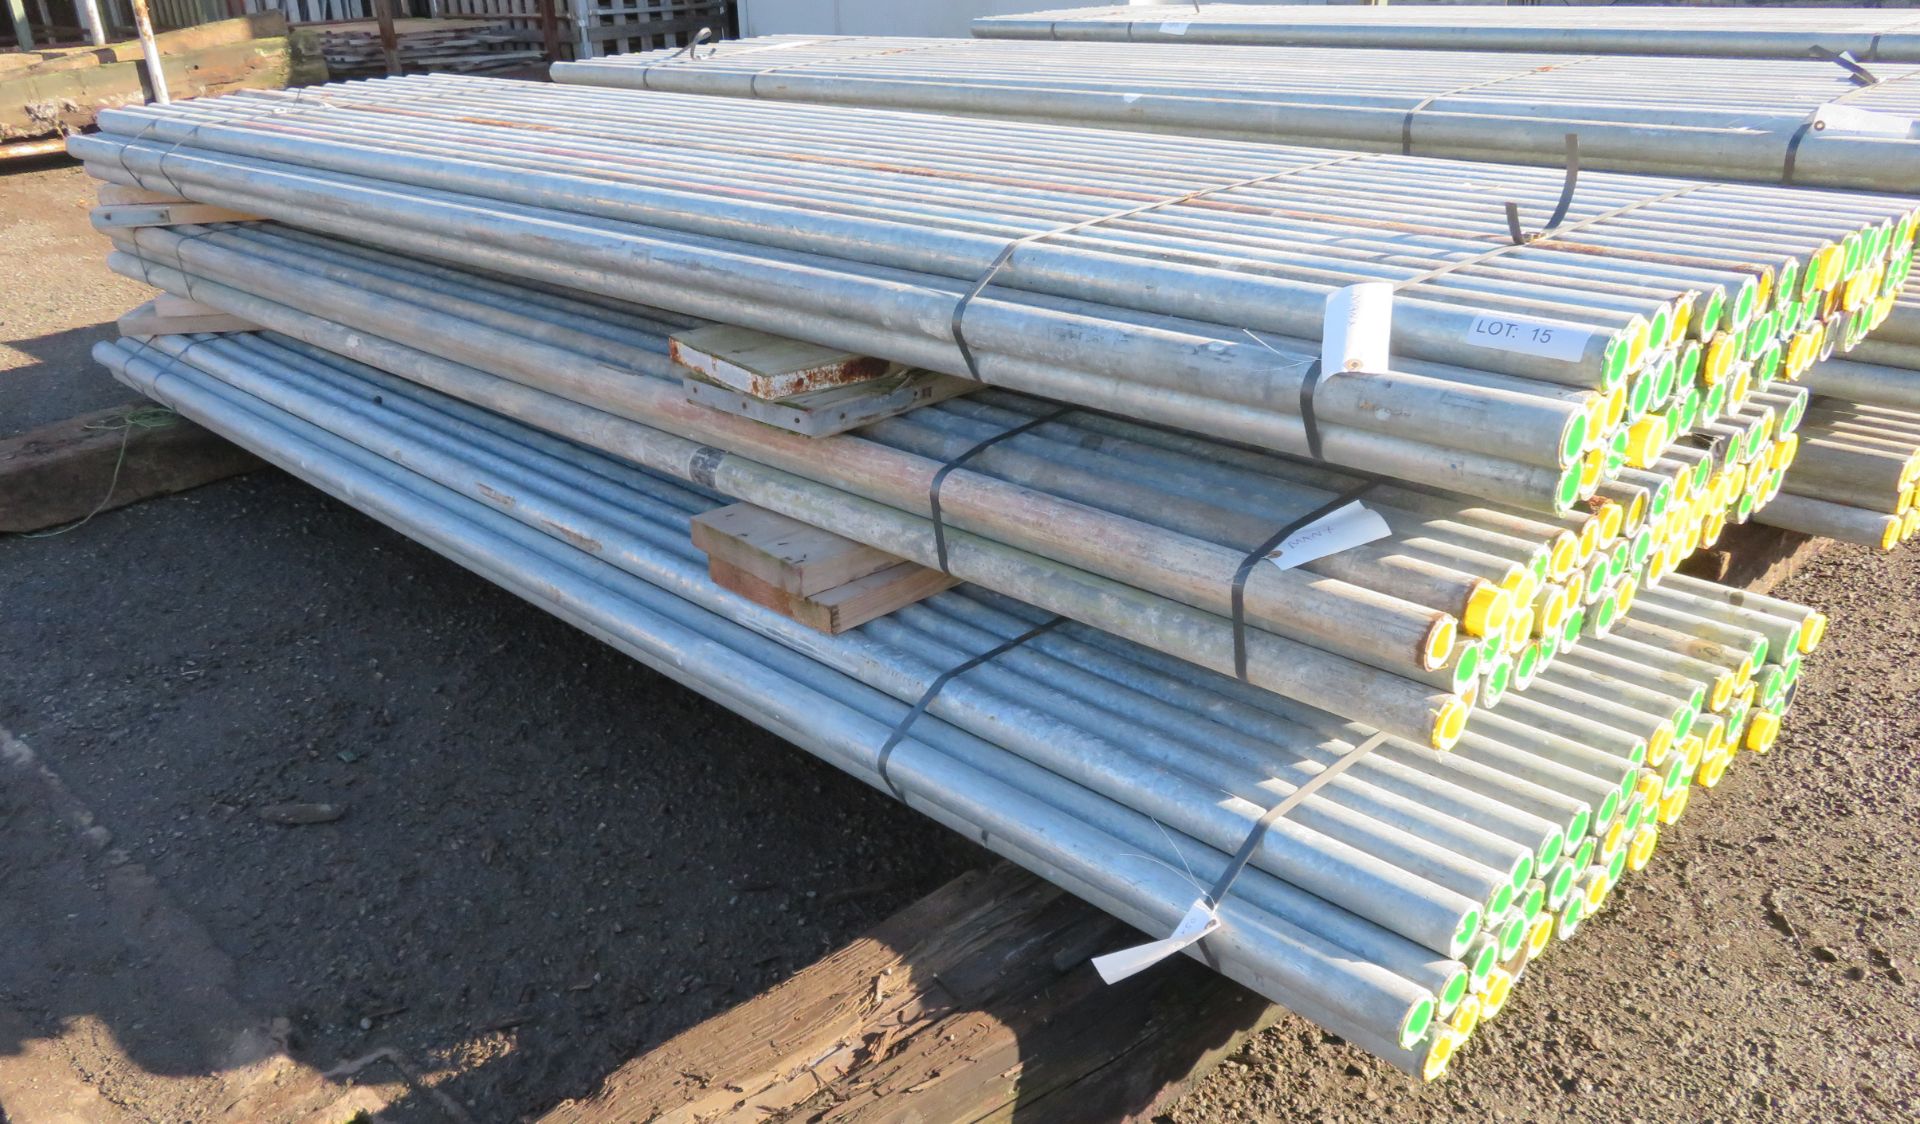 150x 10ft Galvanised Steel Scaffolding Poles 48mm Diameter x 4mm Thick. - Image 2 of 4